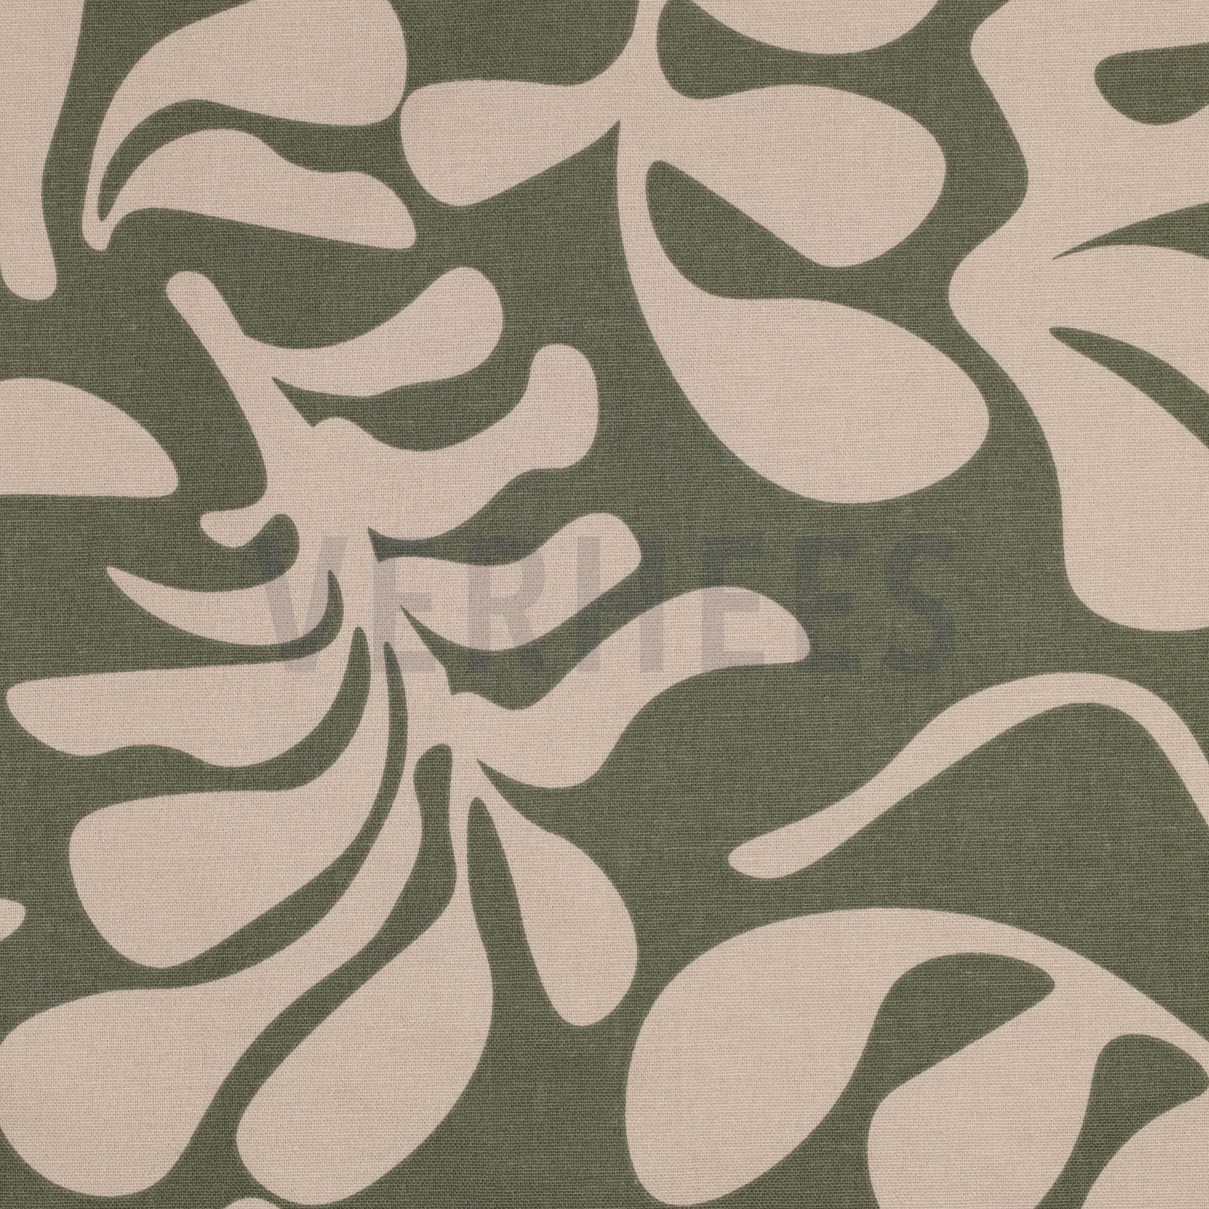 CANVAS VINTAGE LEAVES ARMY GREEN (high resolution)